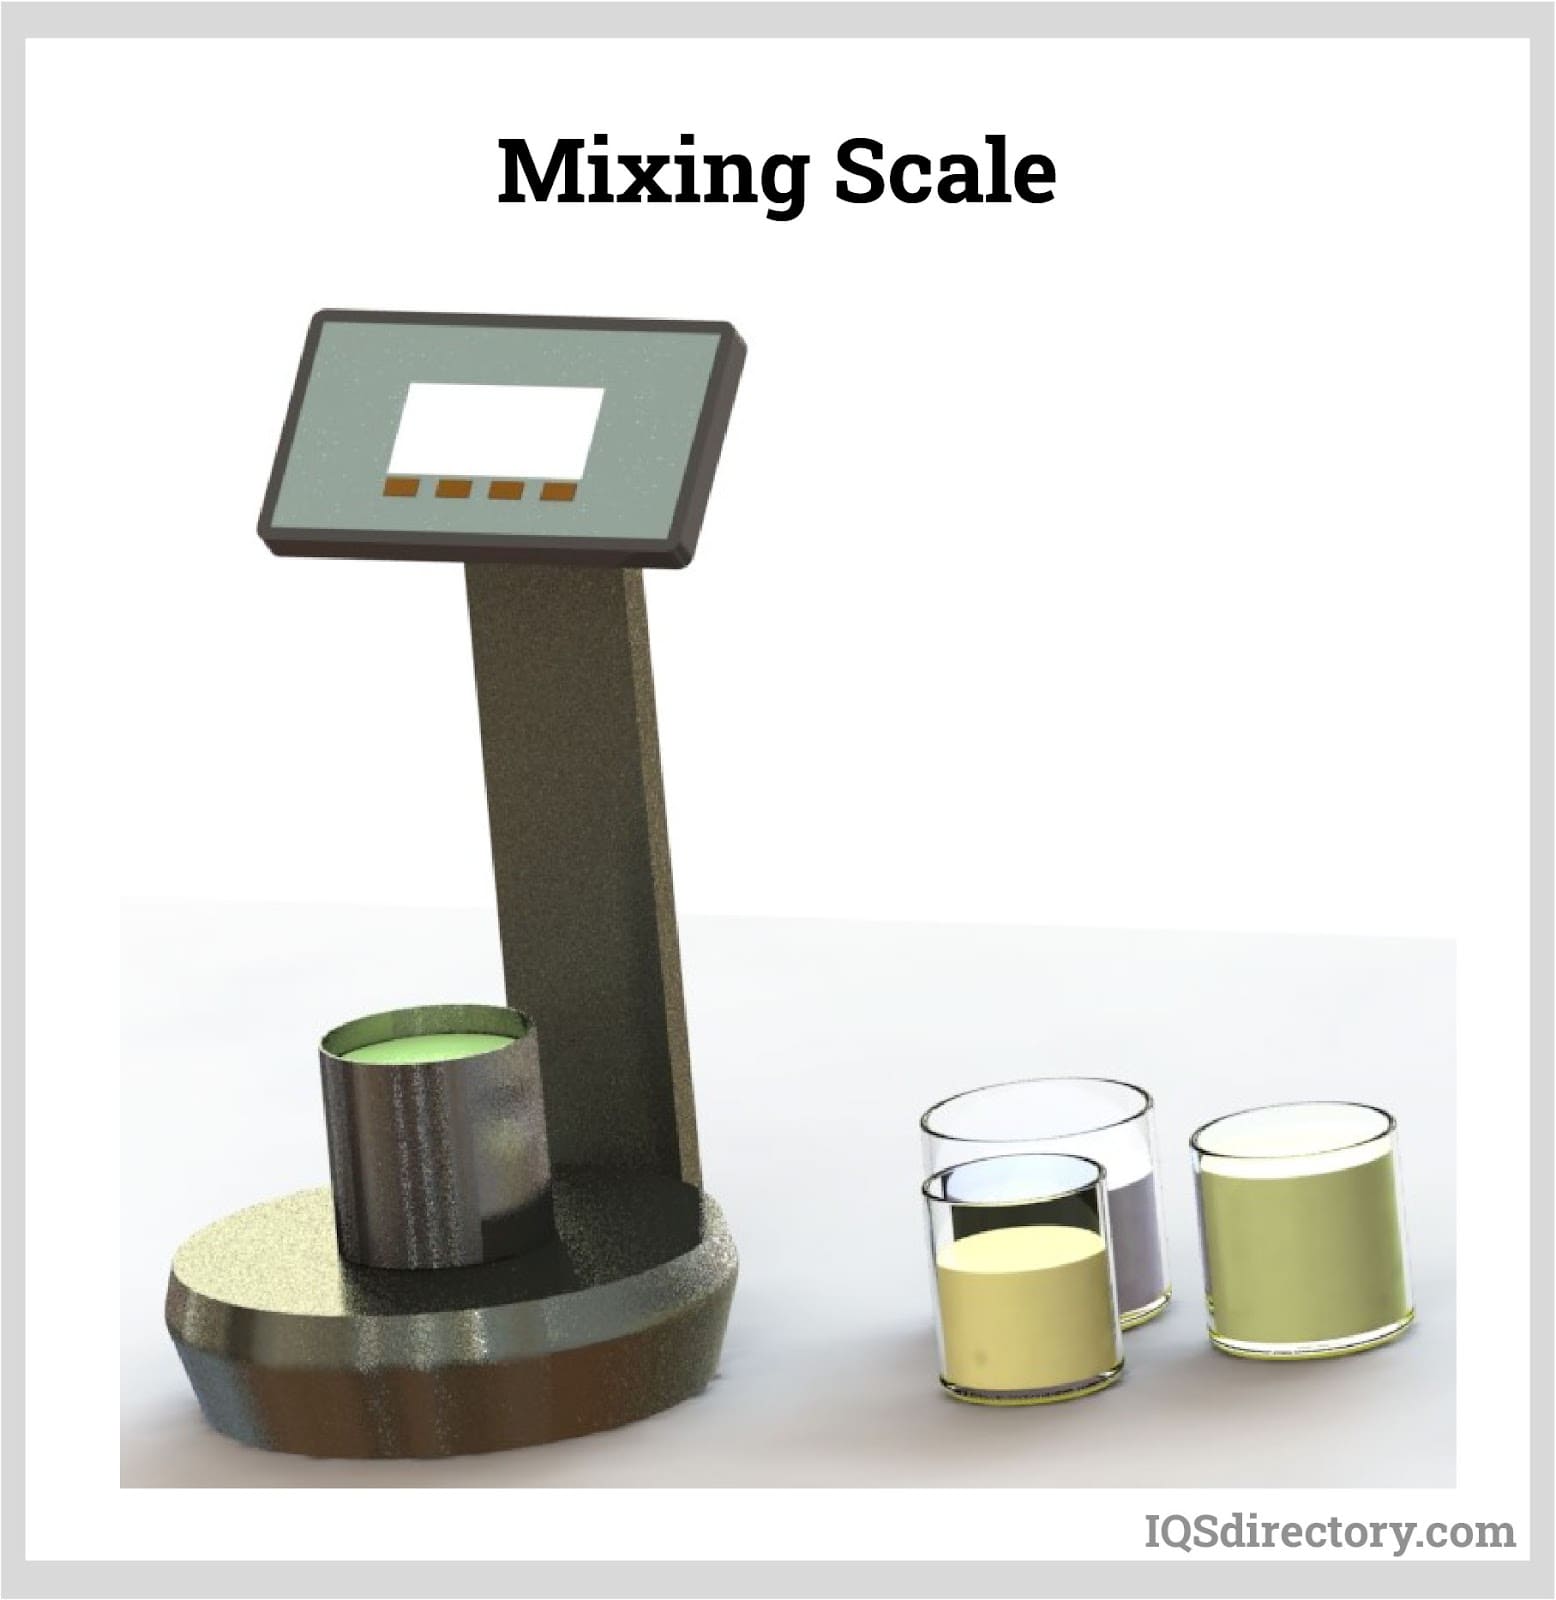 Manual mechanical industrial use weighing scales ( Typical